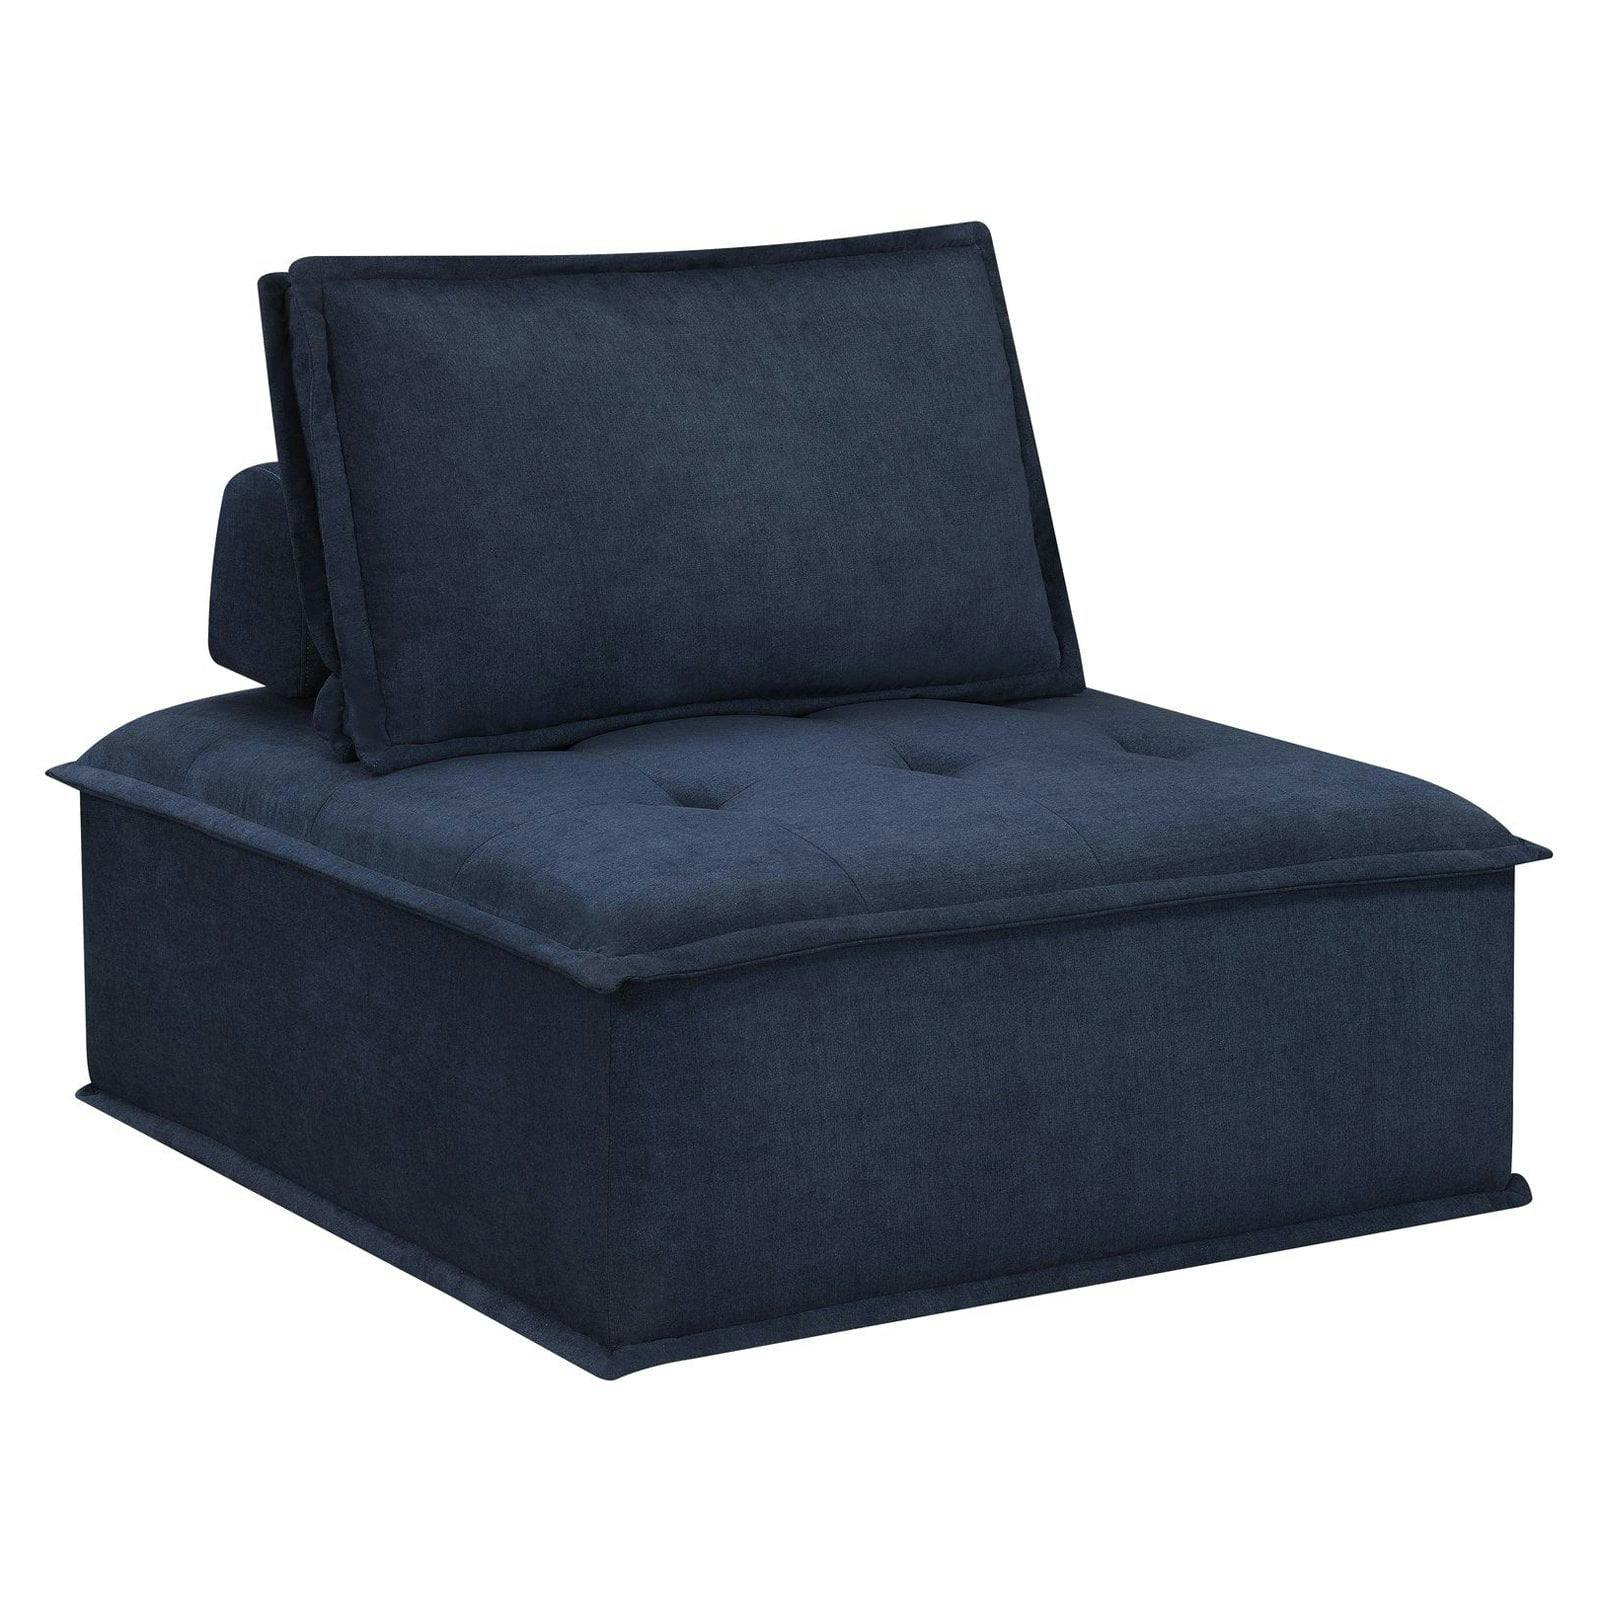 Modular Cube Seating in Durable Blue Linen 42" Square